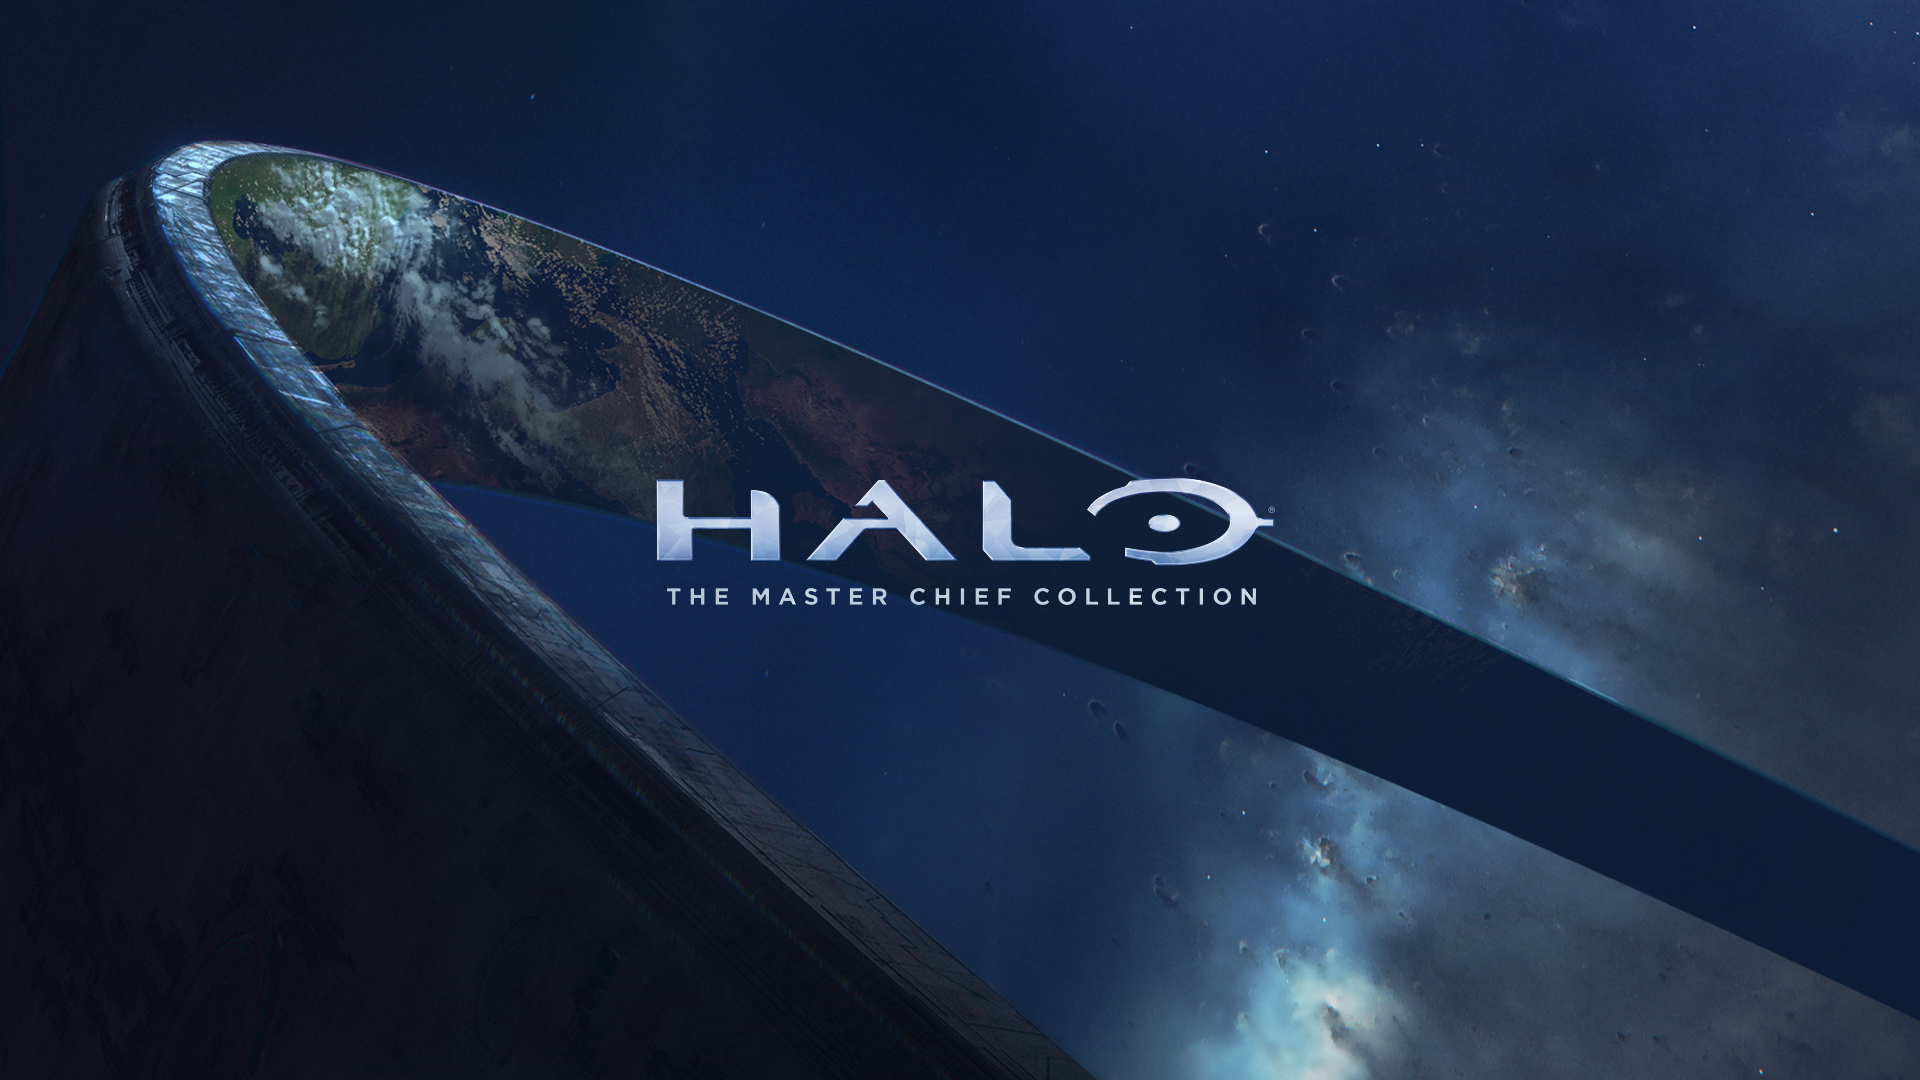 General 1920x1080 Halo: The Master Chief Collection video games Halo (game) Halo 3 digital art science fiction